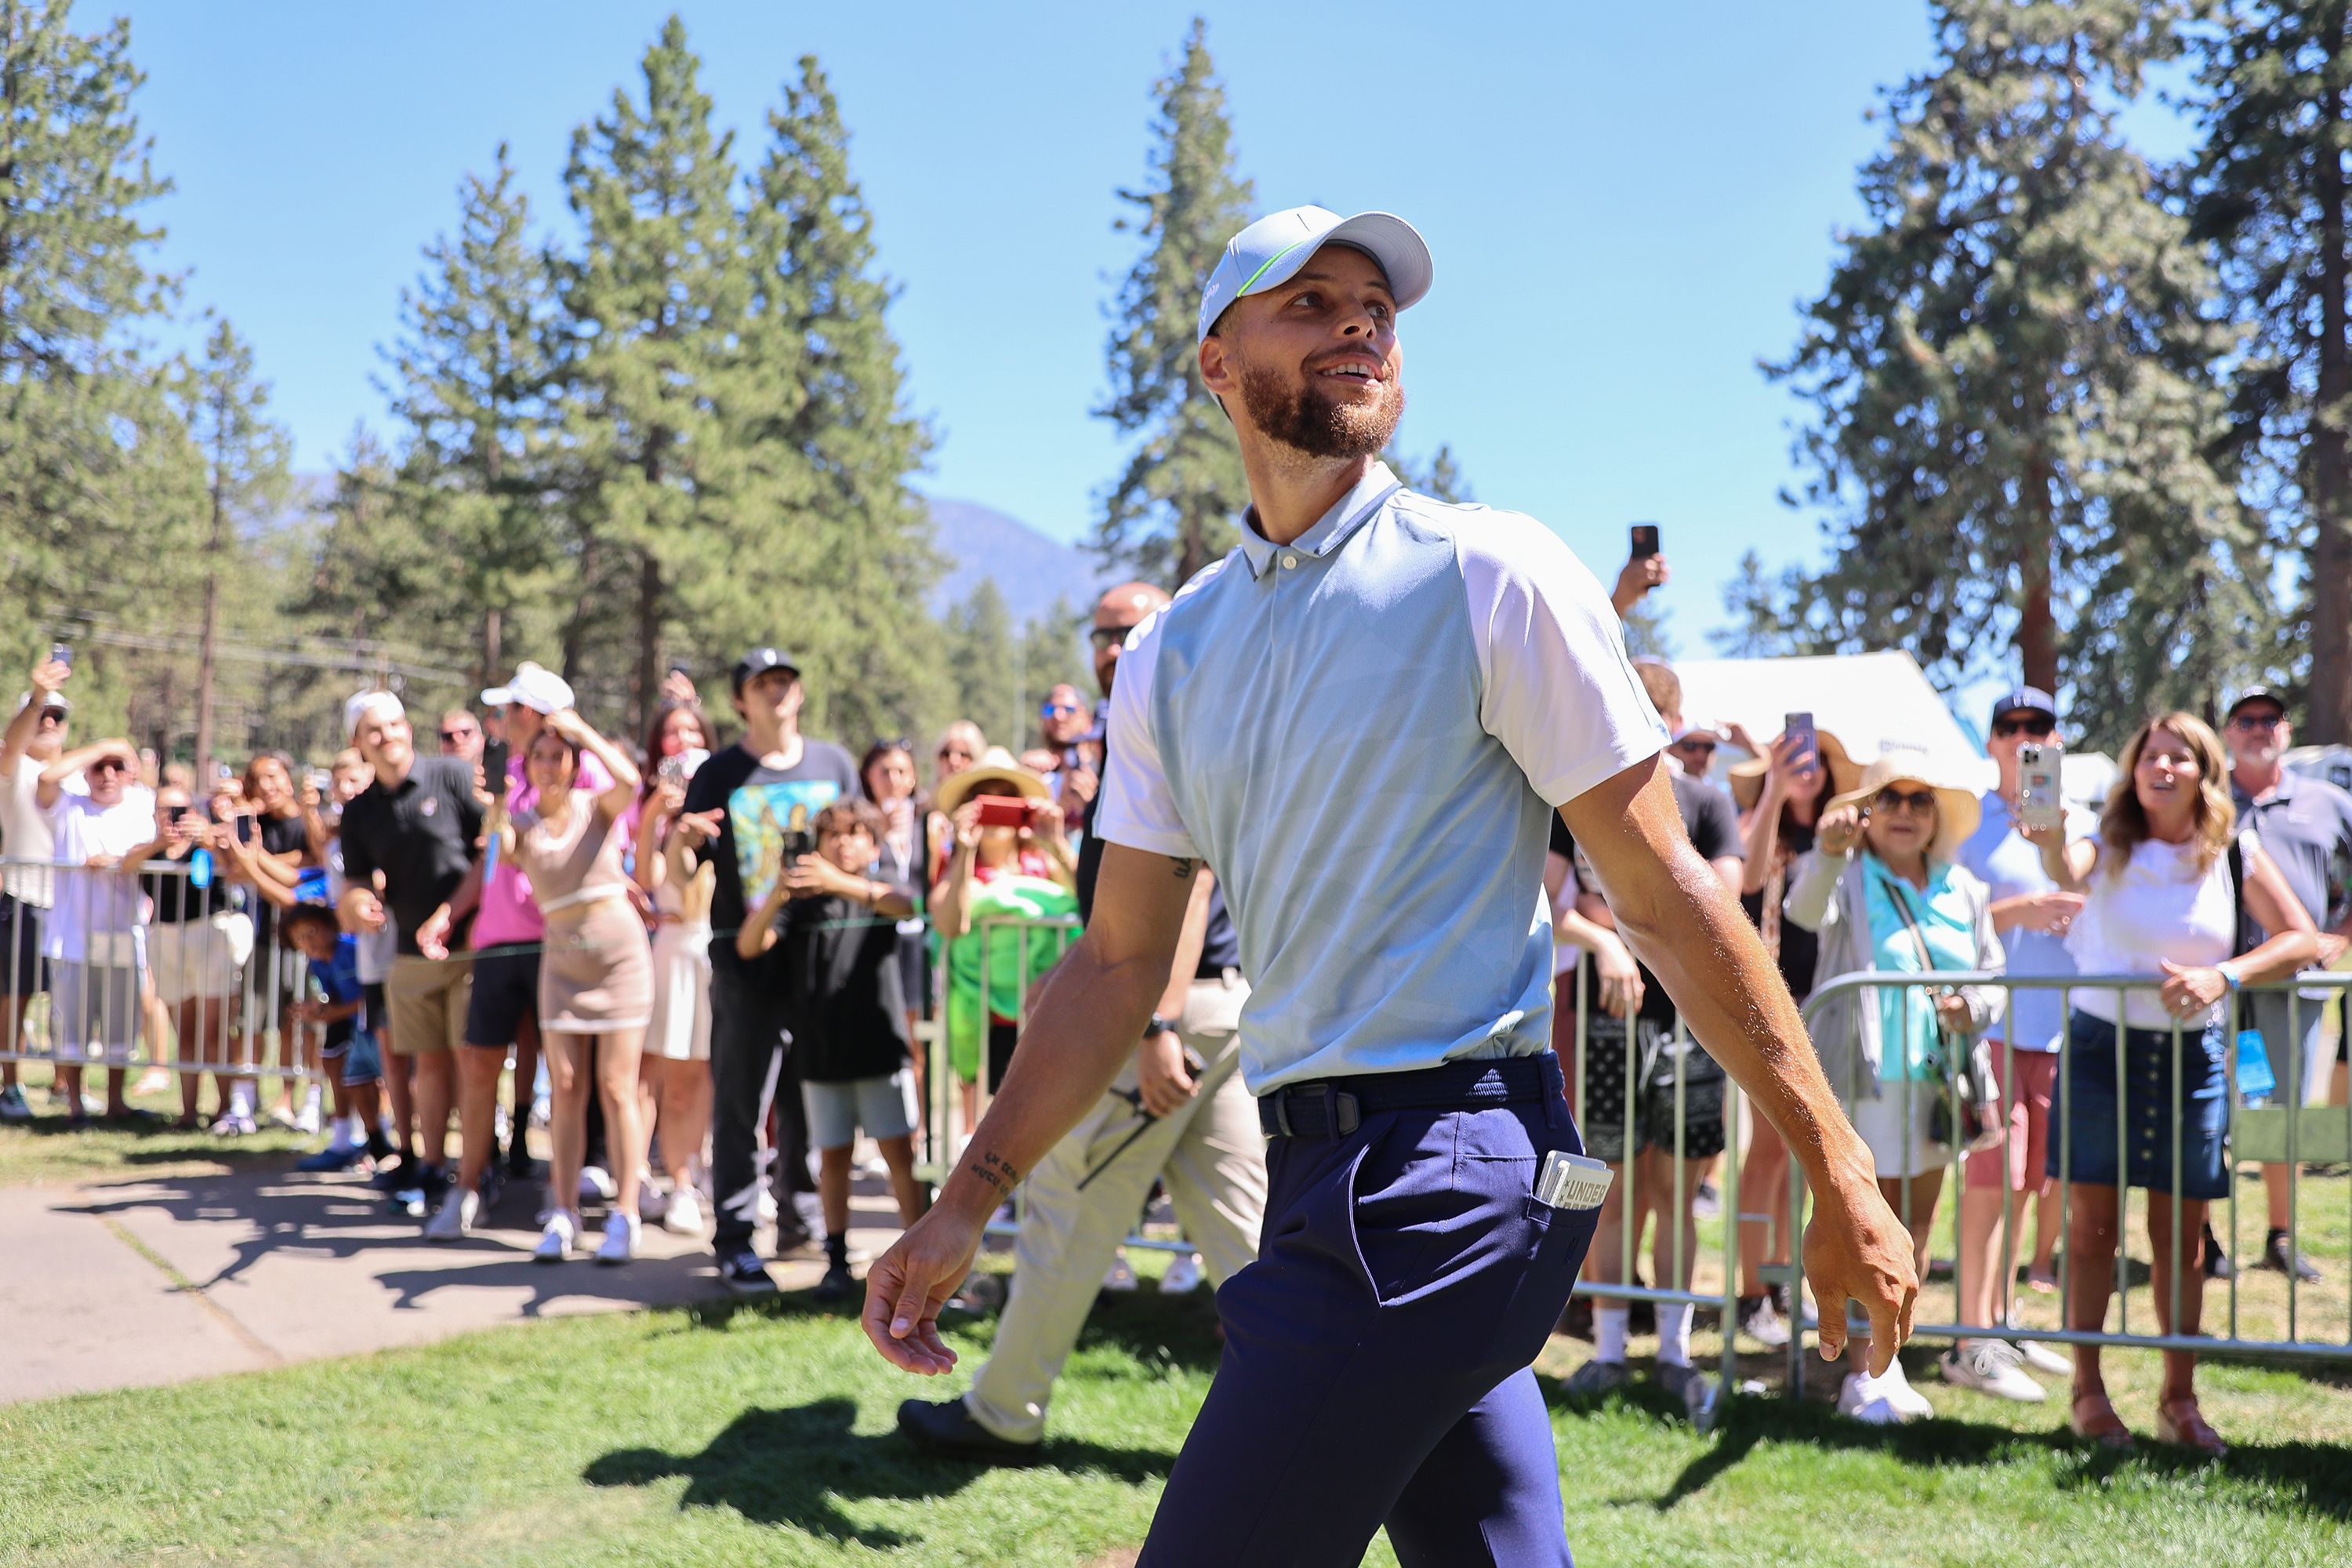 Stephen Curry On That Hole In One And Continuously Being “Underrated”